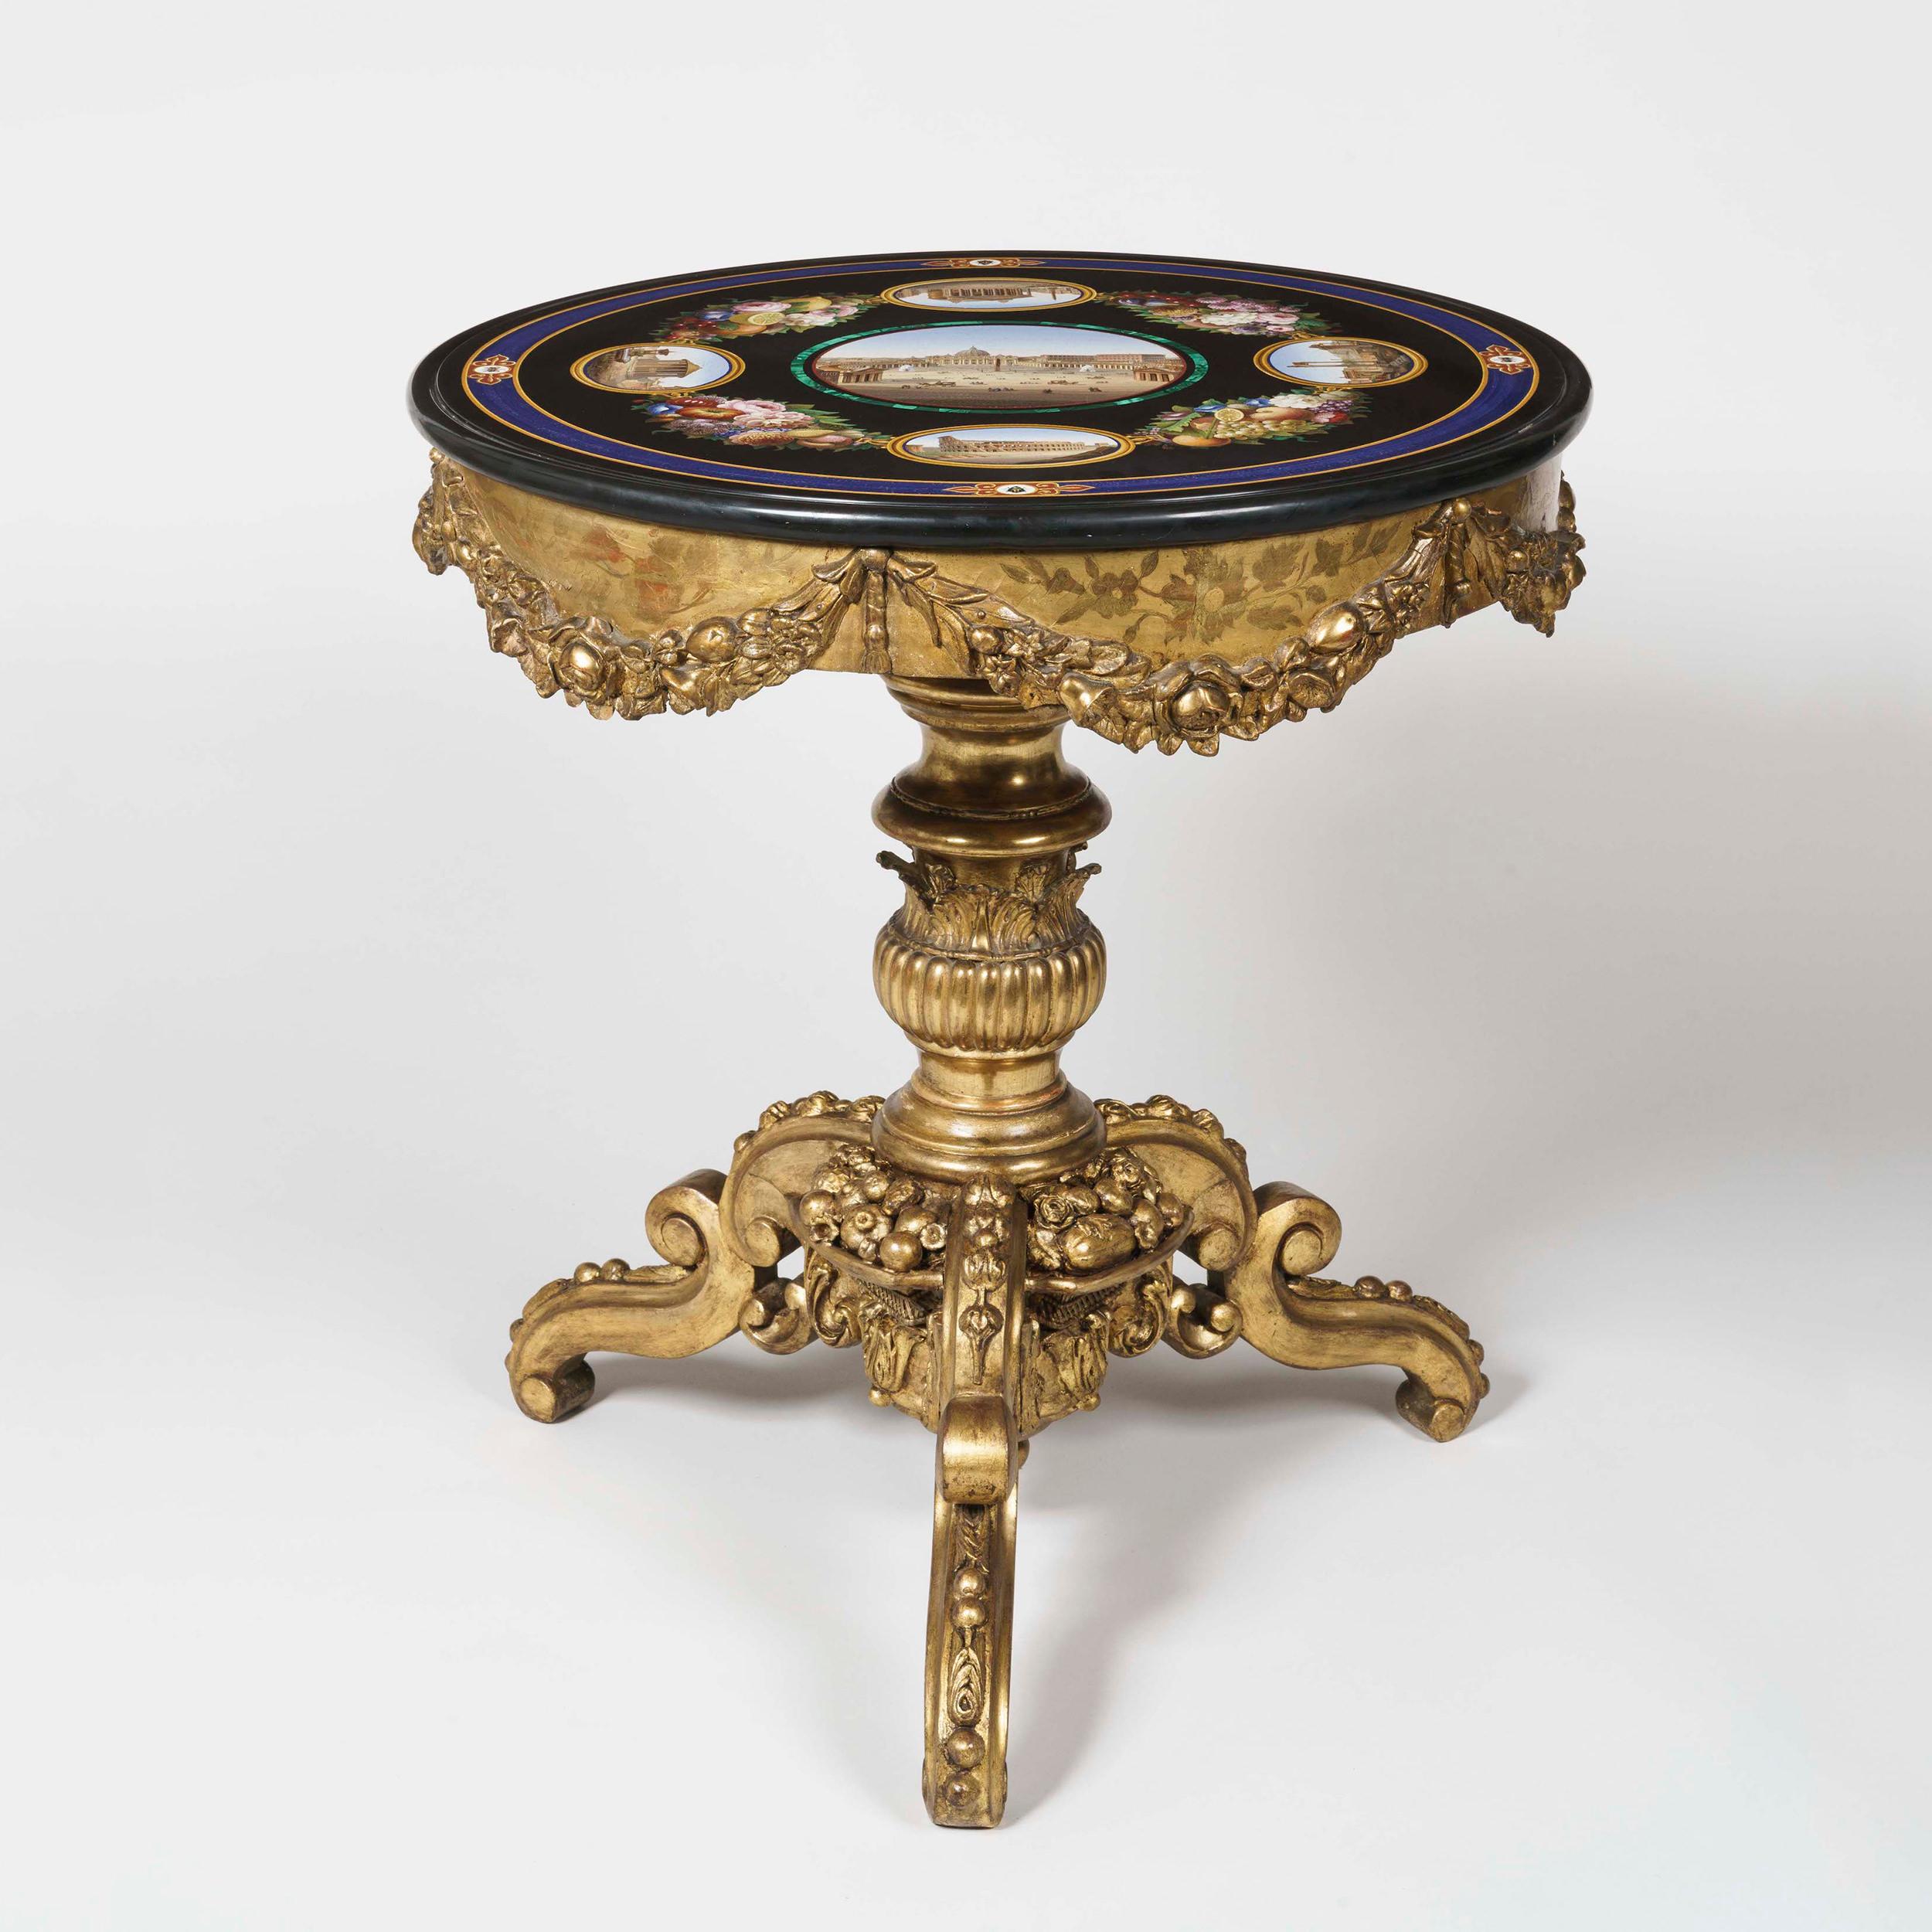 A rare grand tour table
Possibly by Cesare Roccheggiani

The circular platform of marmore nero, inset with fine micromosaic panels consisting of thousands of coloured glass tesserae; a central roundel depicting The Vatican from St Peter's Square